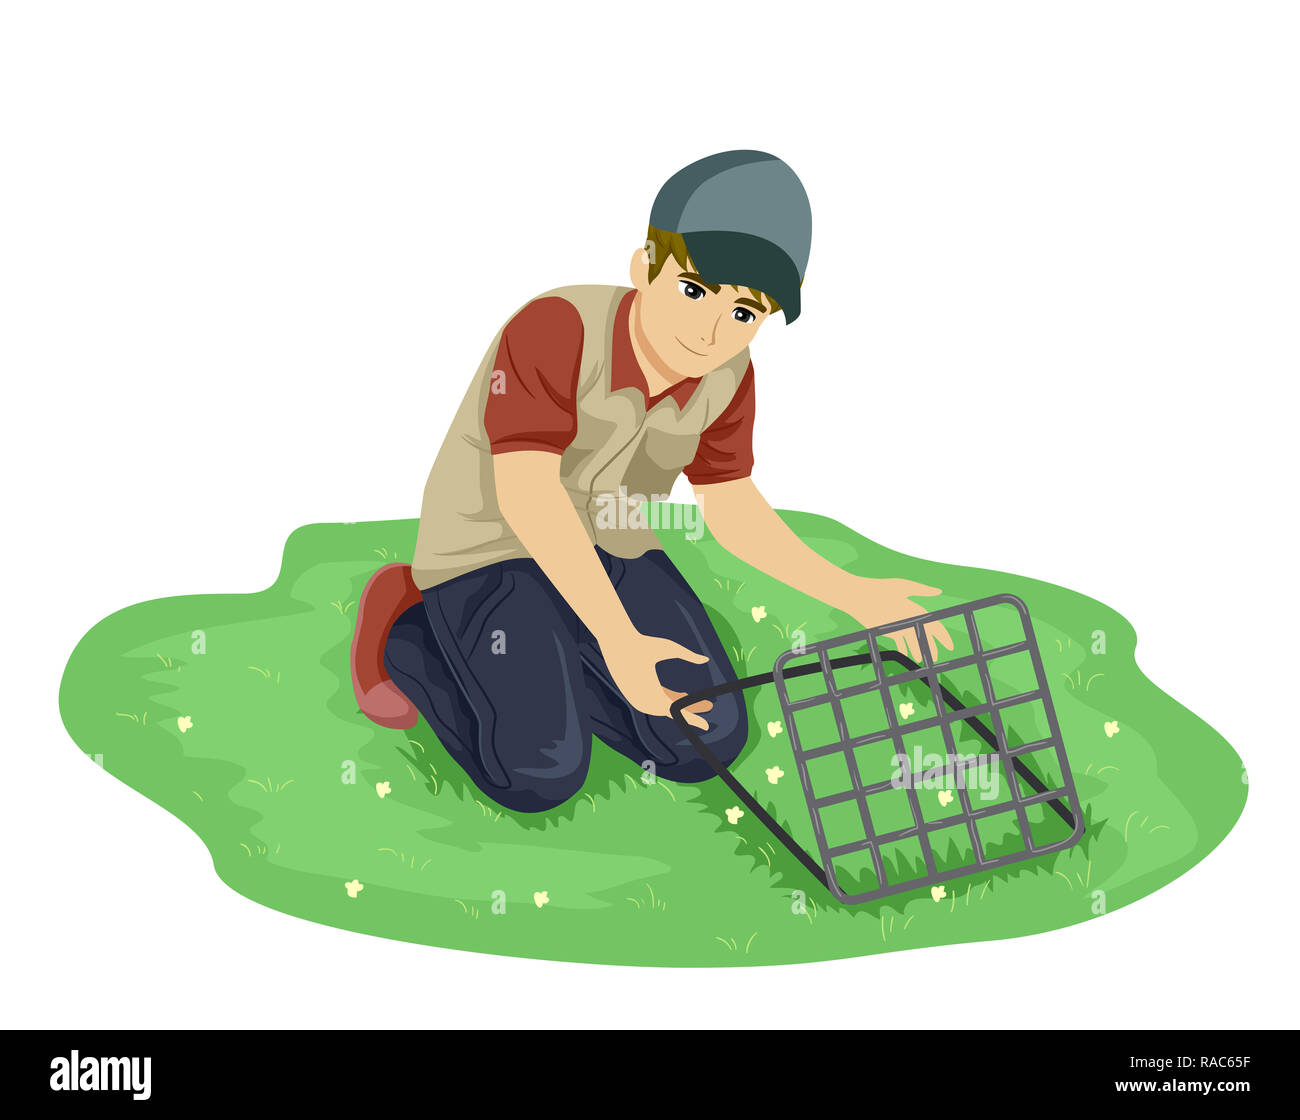 Illustration of a Teenage Guy Botanist Outdoors Collecting Samples Using the Quadrant Method Stock Photo